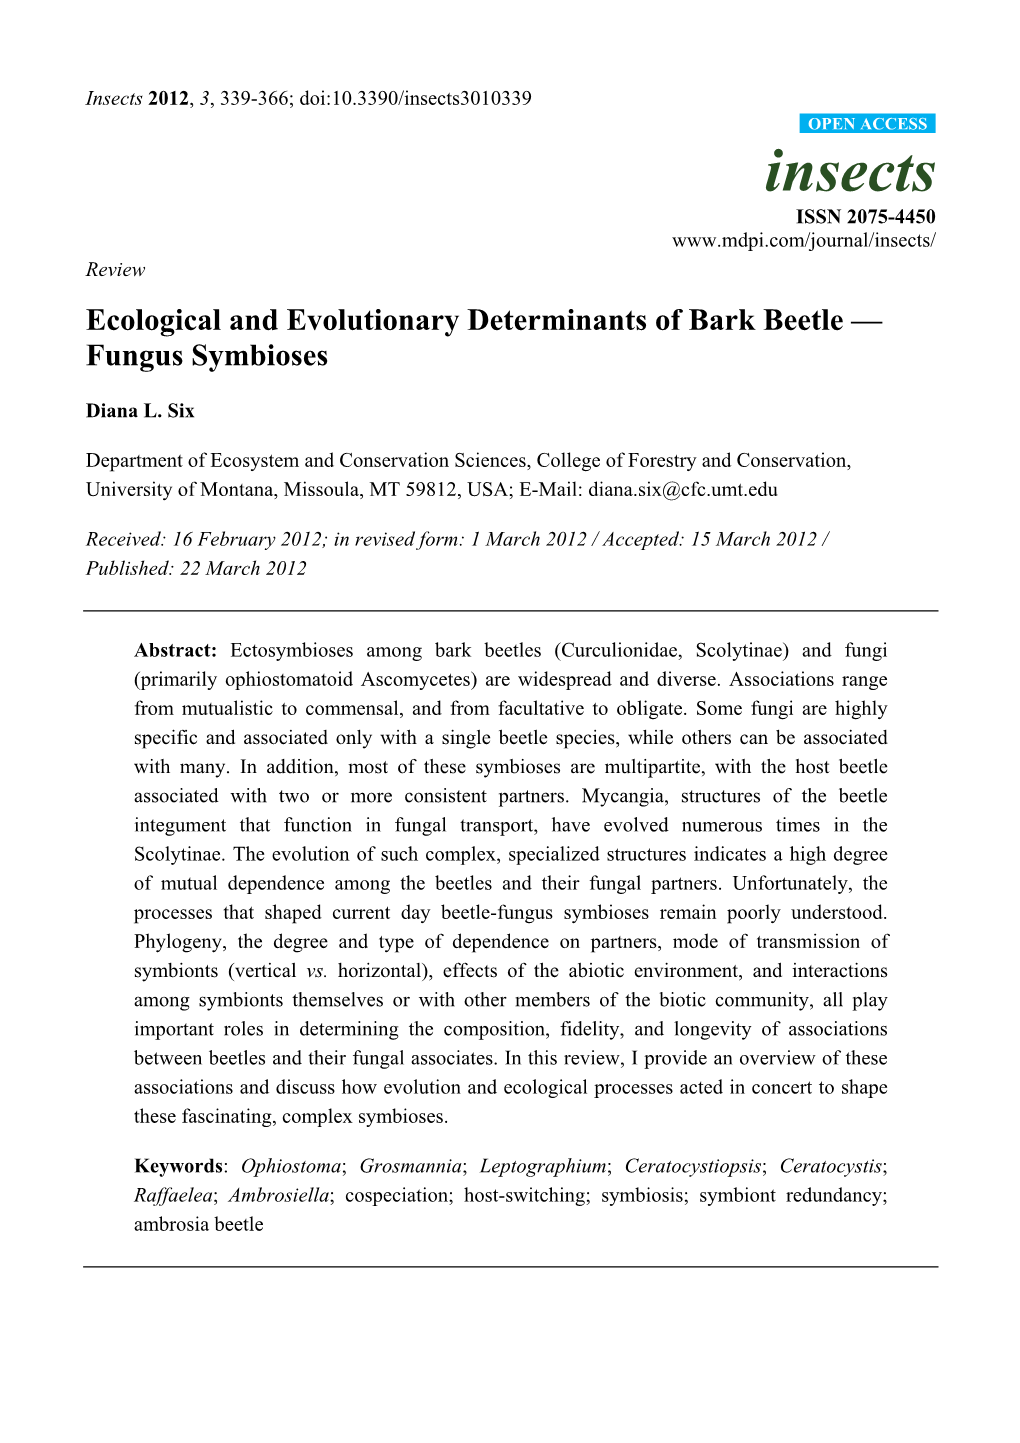 Ecological and Evolutionary Determinants of Bark Beetle — Fungus Symbioses